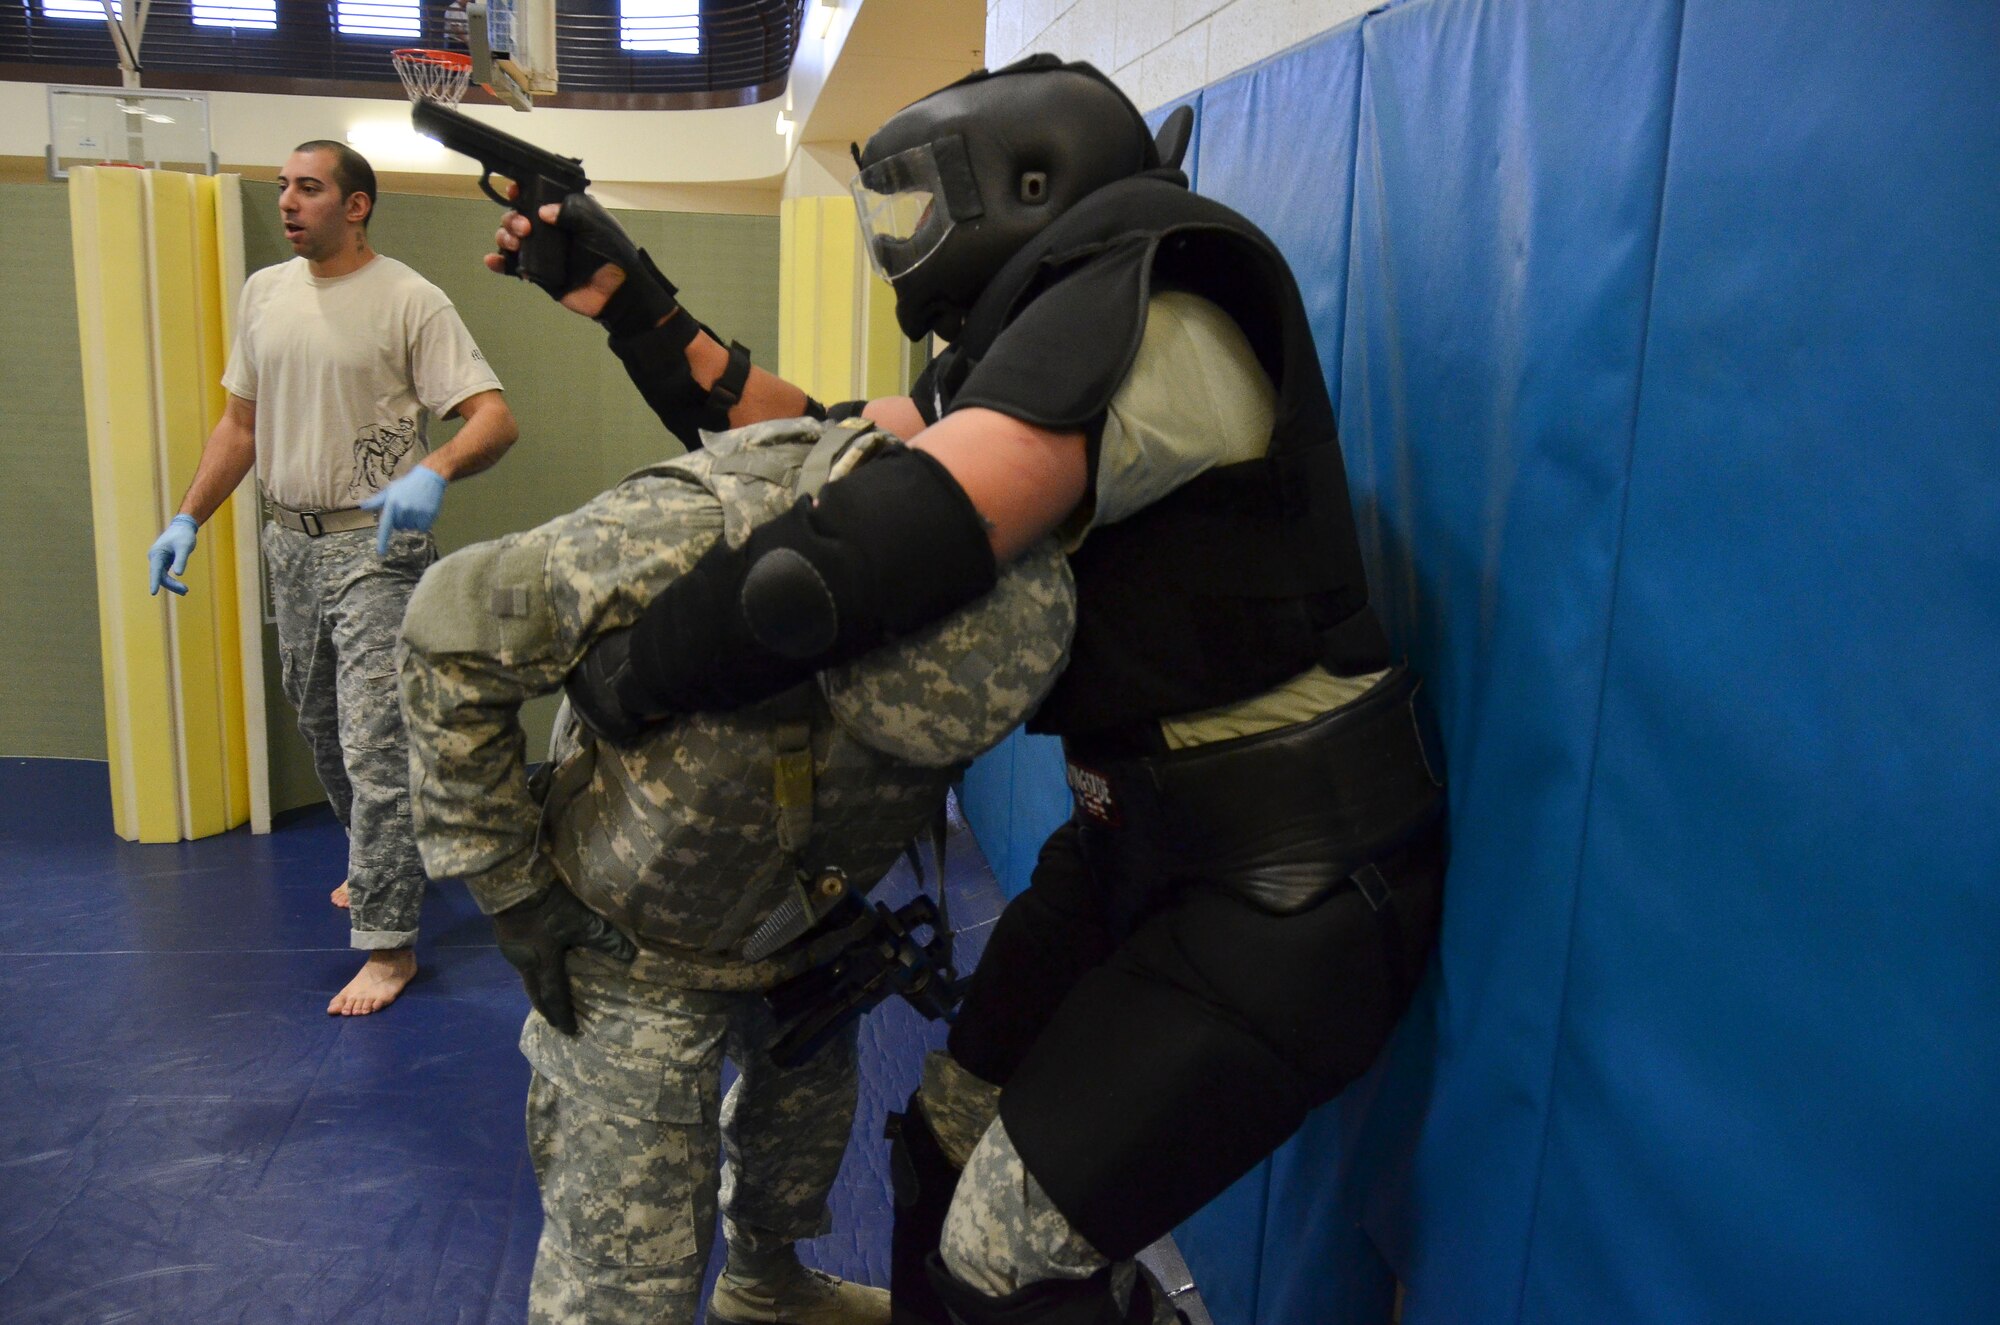 A combatant takes the weapon from a student during the room clearing portion of the Modern Army Combatives Program (MACP) Basic Combatives Course Level 1 at Davis-Monthan Air Force Base, Ariz., Jan. 16, 2014. The 40-hour course focuses on the three phases of basic fighting strategy; close the distance, gain the dominate position, and how to finish the fight. (U.S. Air Force photo by Staff Sgt. Adam Grant/Released)